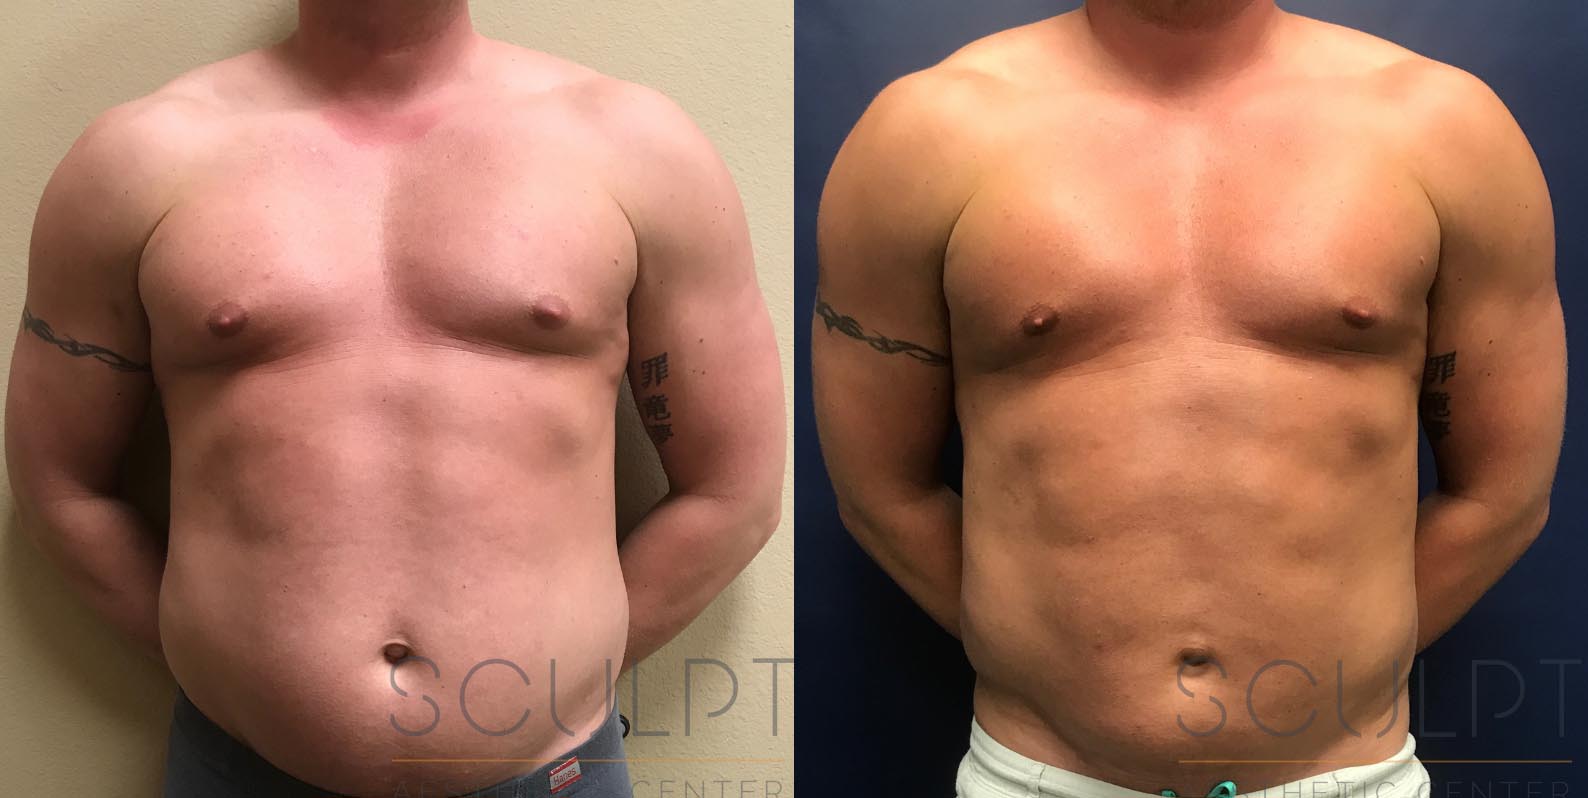 Liposuction to the Abdomen, Chest Before and After Photo by Sculpt Aesthetic Center in Frisco, TX